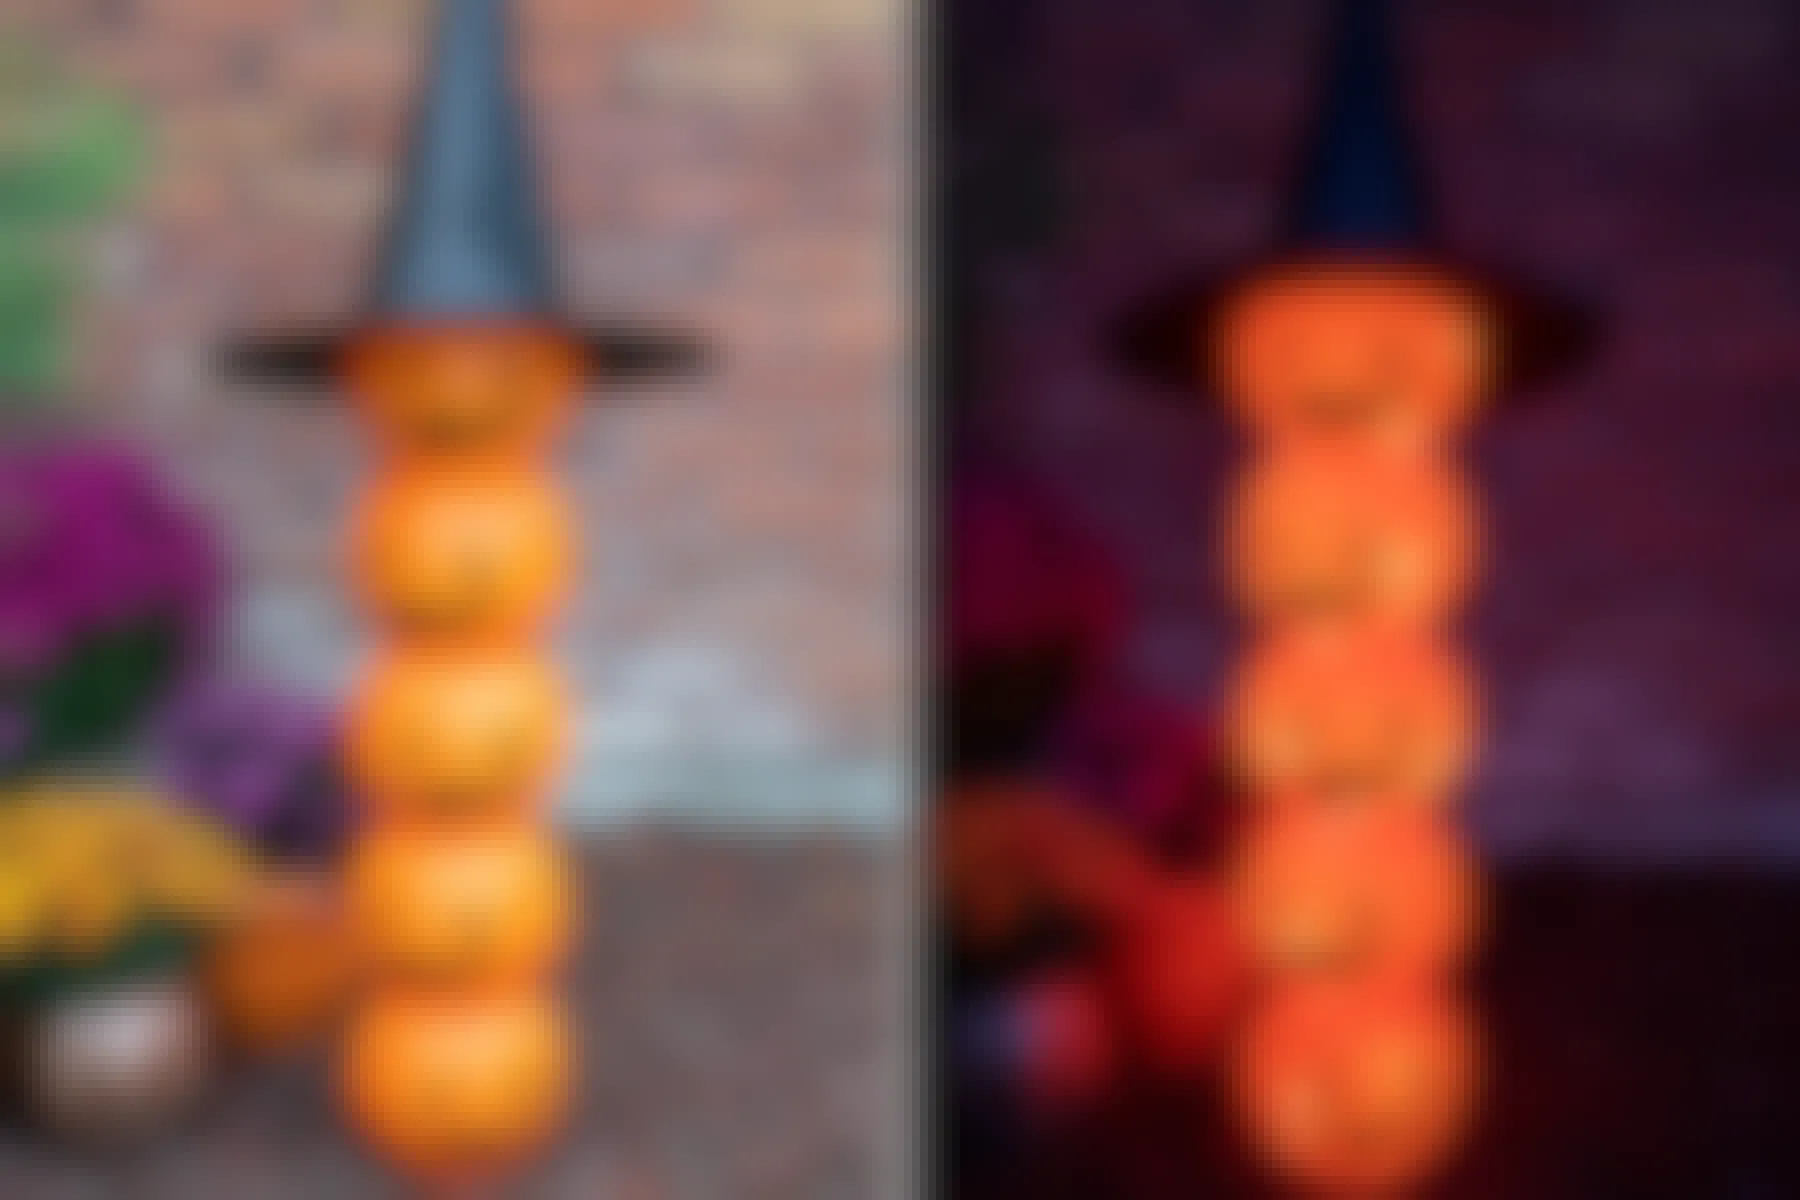 A light-up Halloween pumpkin totem made from plastic trick-or-treat pumpkin pails and a witch hat set up in a garden.